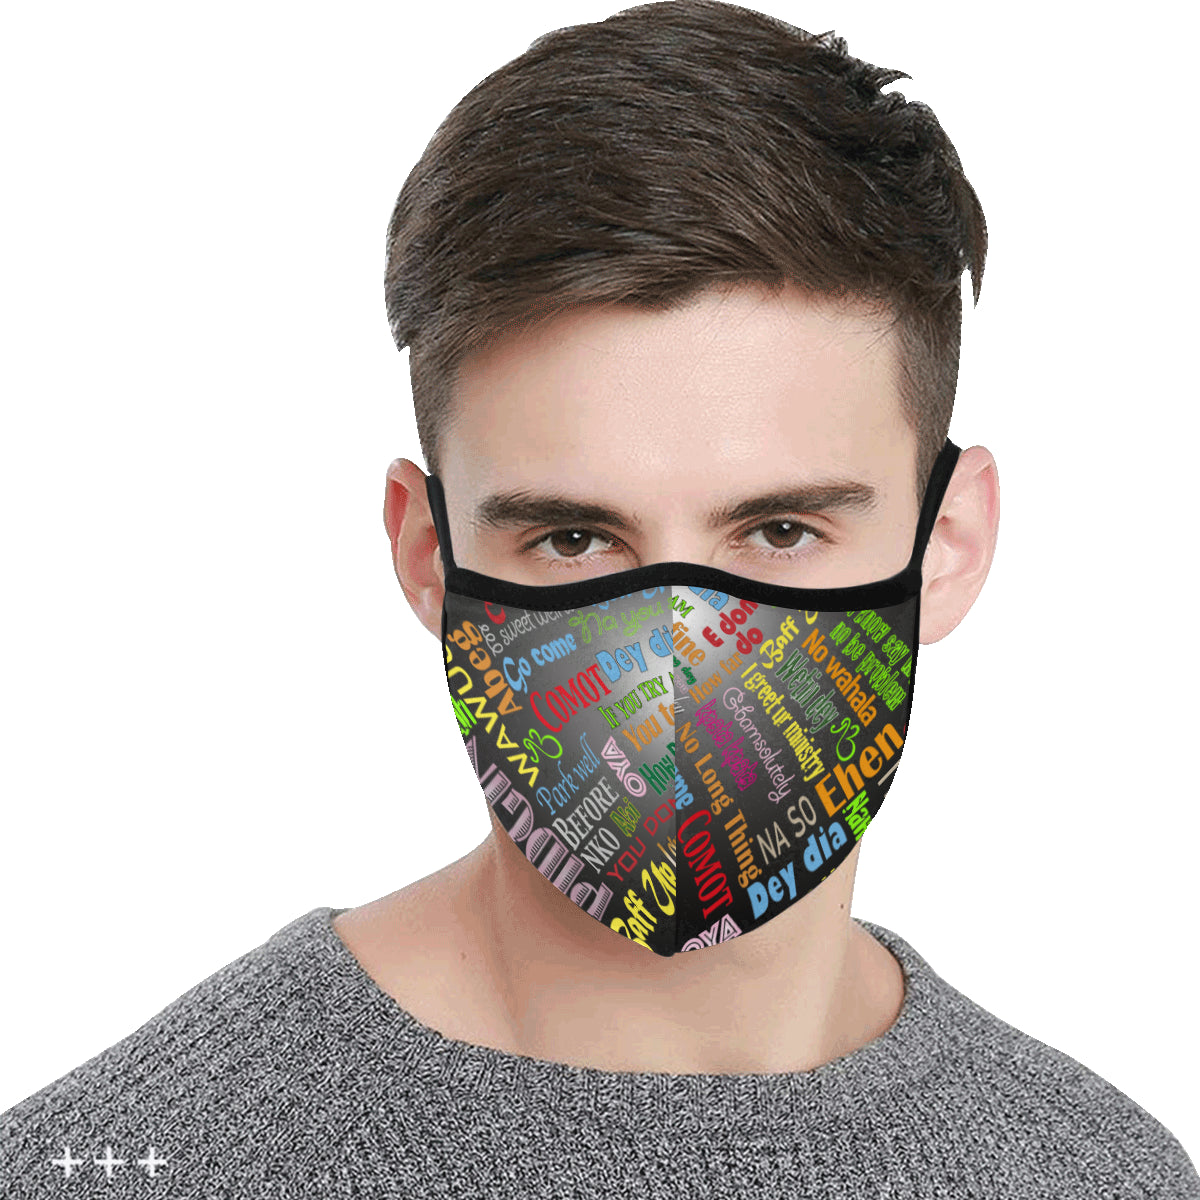 flyersetcinc Pidgin Print Cotton Fabric Face Mask with filter slot (30 Filters Included) - Non-medical use